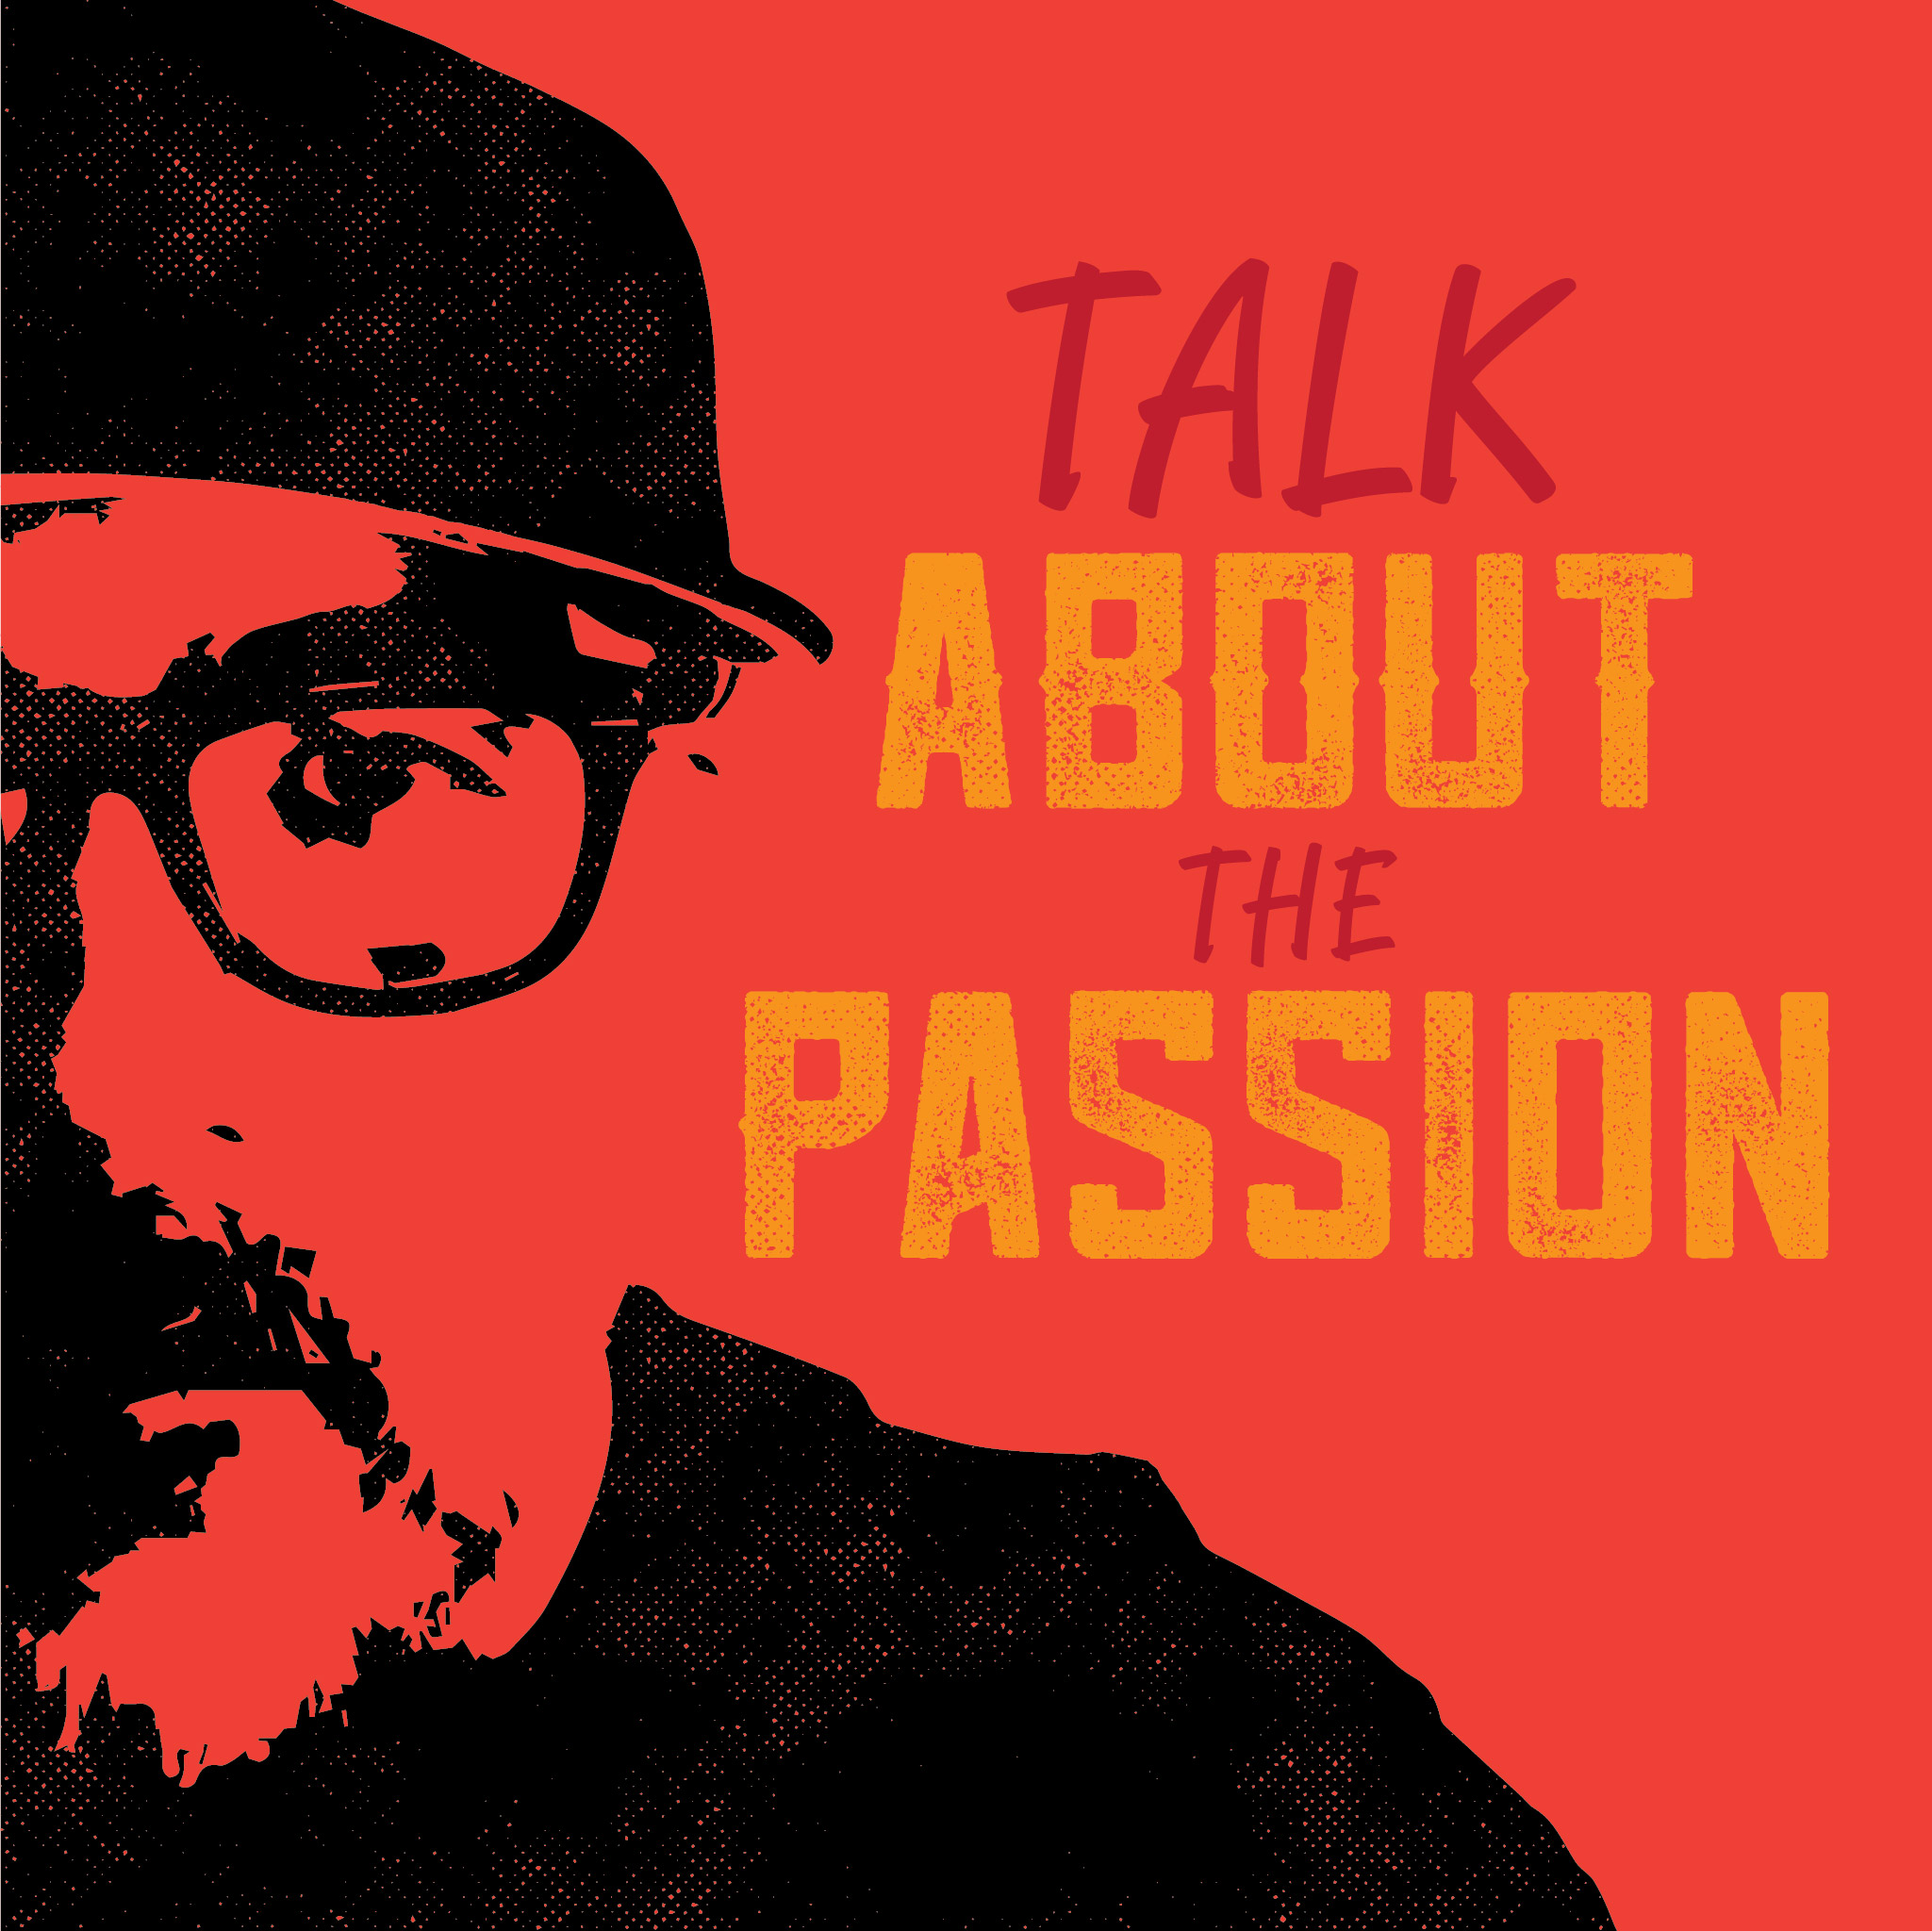 Episode 20: You Might Ask Me What (A Conversation With Nate Newton)